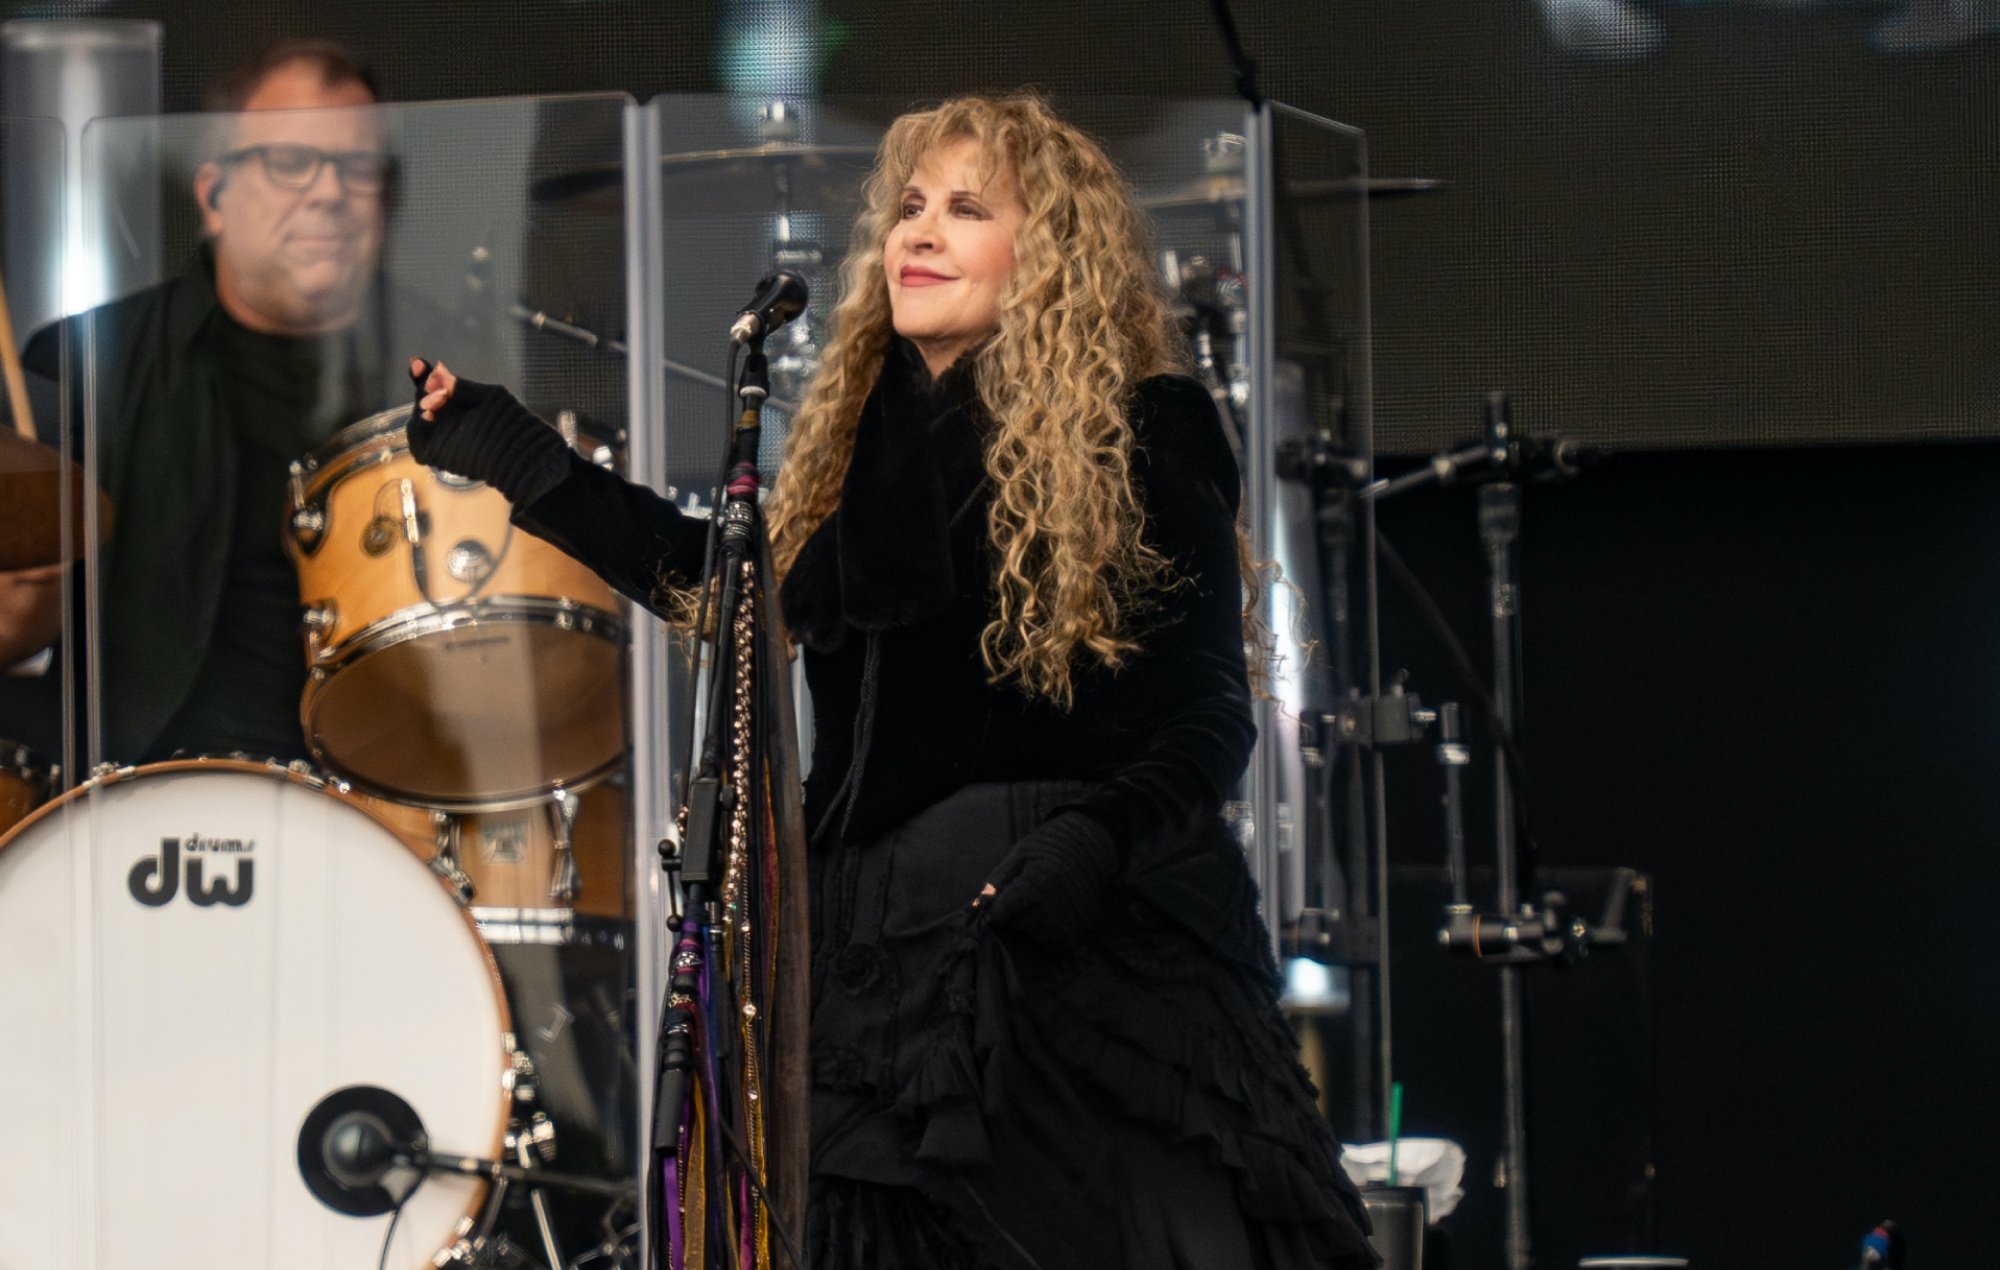 Stevie Nicks opens up about health issue that led to postponed UK shows